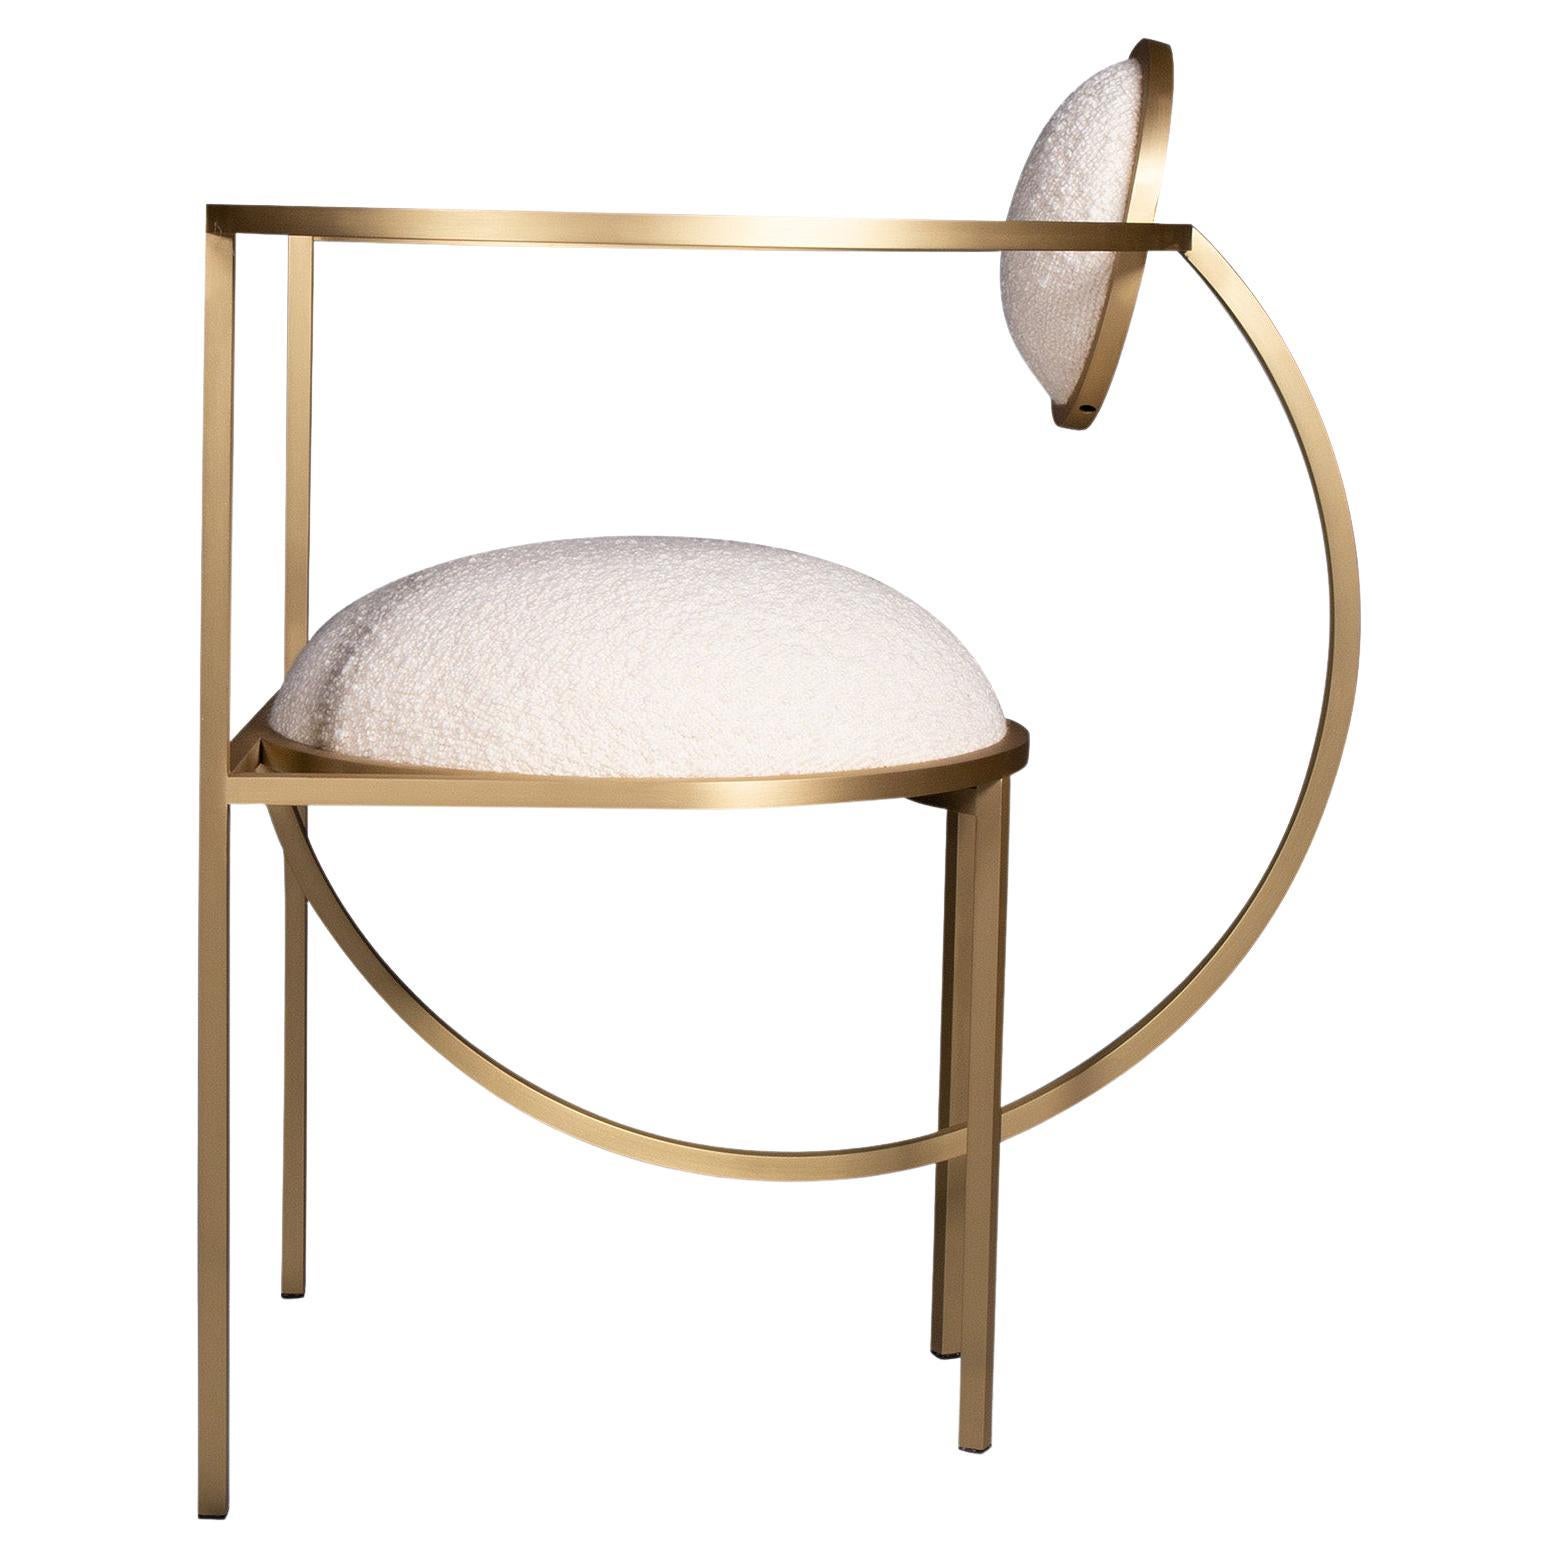 Lunar Chair in Cream Boucle Wool Fabric and Brushed Brass, by Lara Bohinc